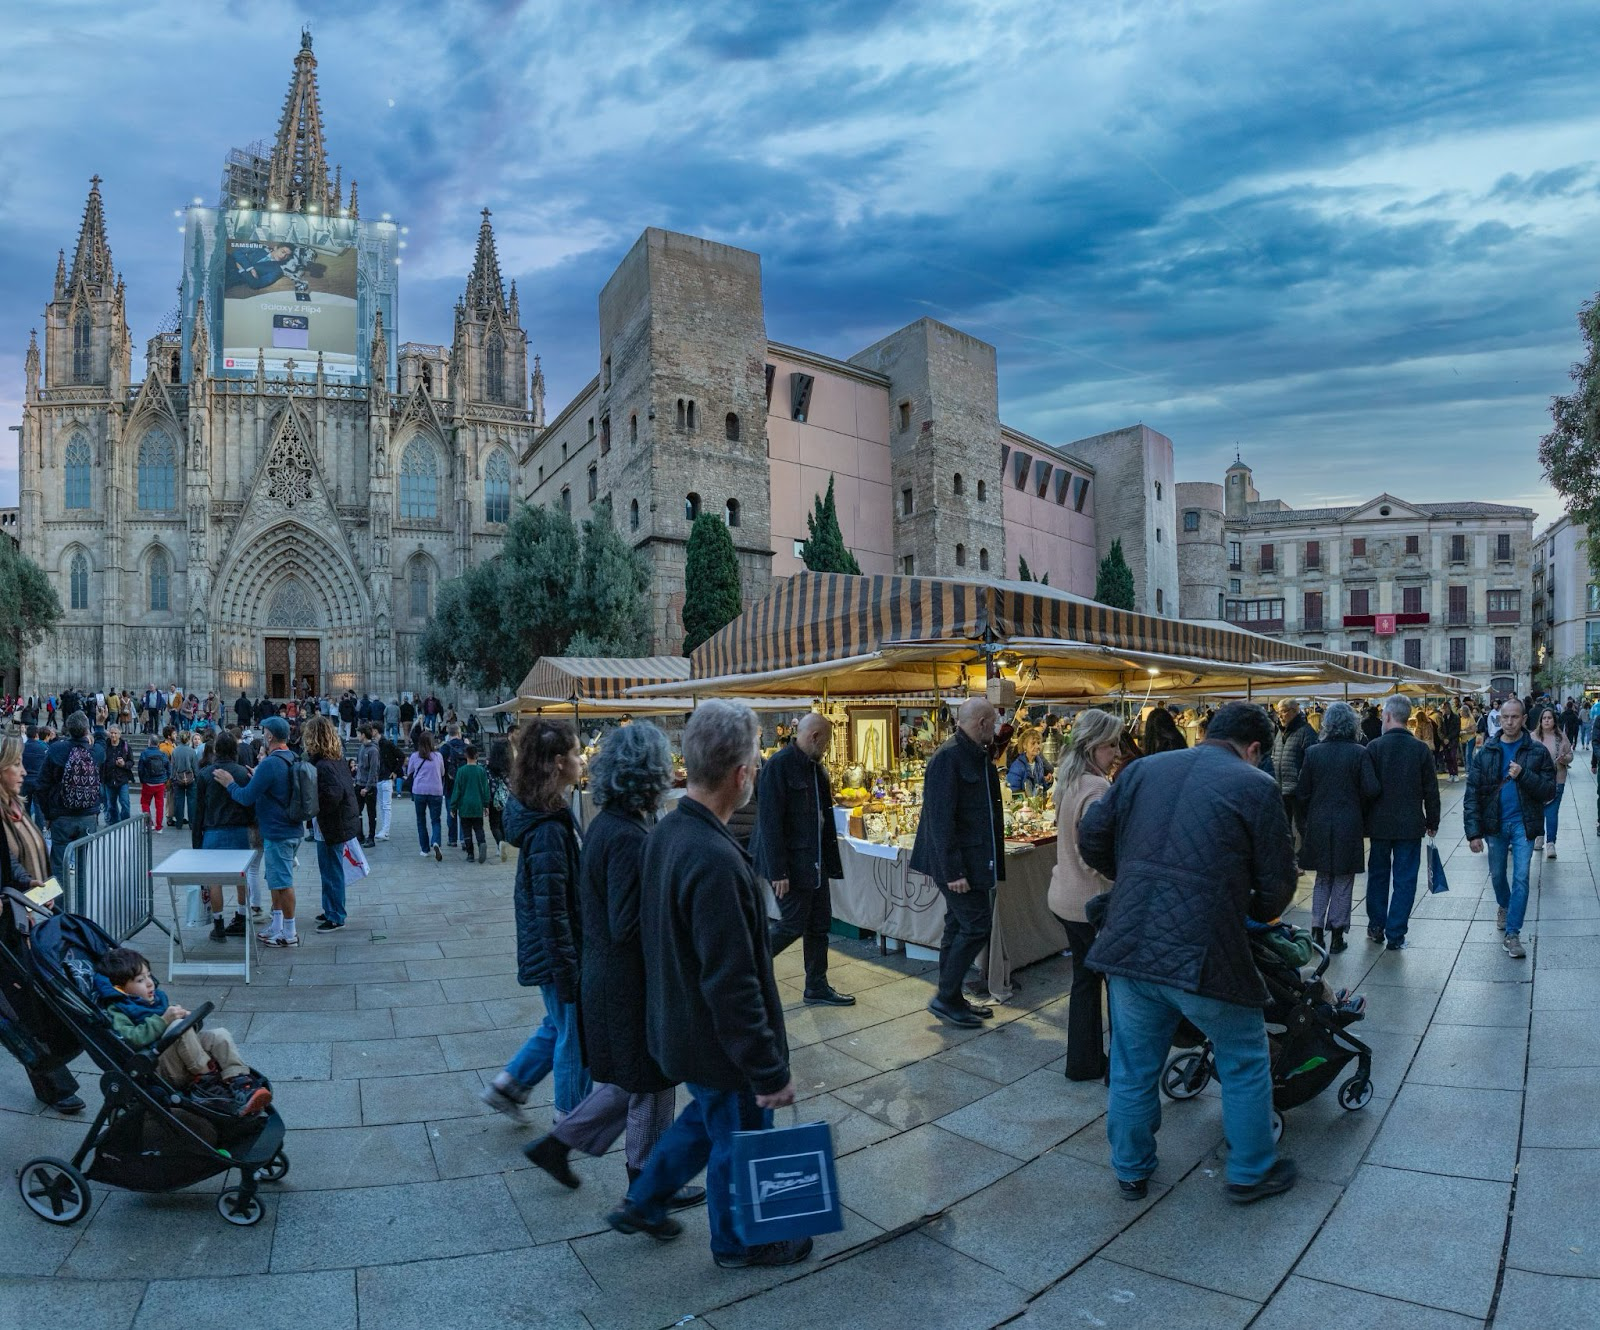 Spain has a welcoming community and thriving culture that is especially prominent in the winter season. Check out the Christmas markets. 
Pictured: the Christmas markets of Spain in the city center street